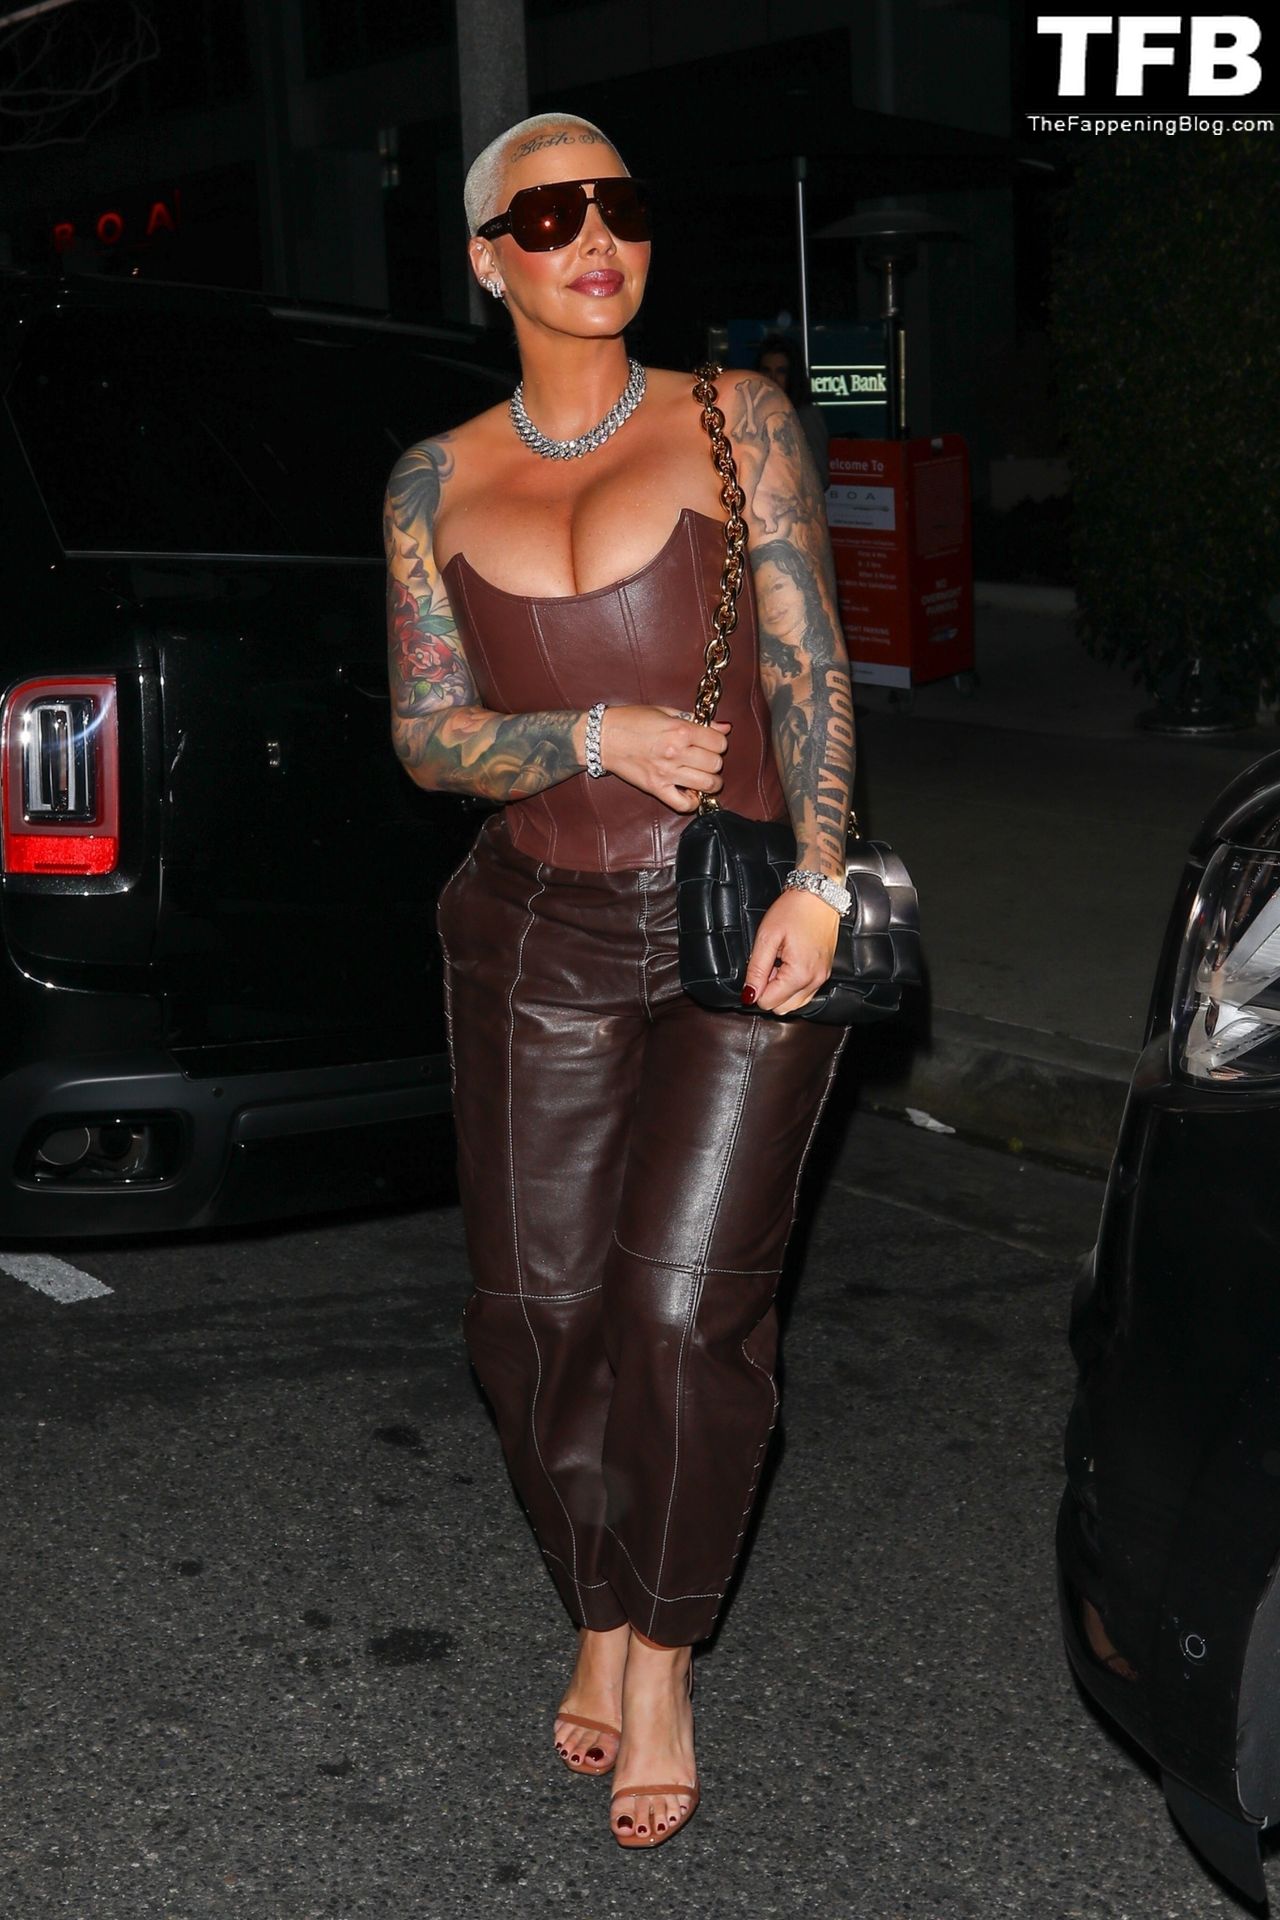 Amber-Rose-Sexy-The-Fappening-Blog-33.jpg